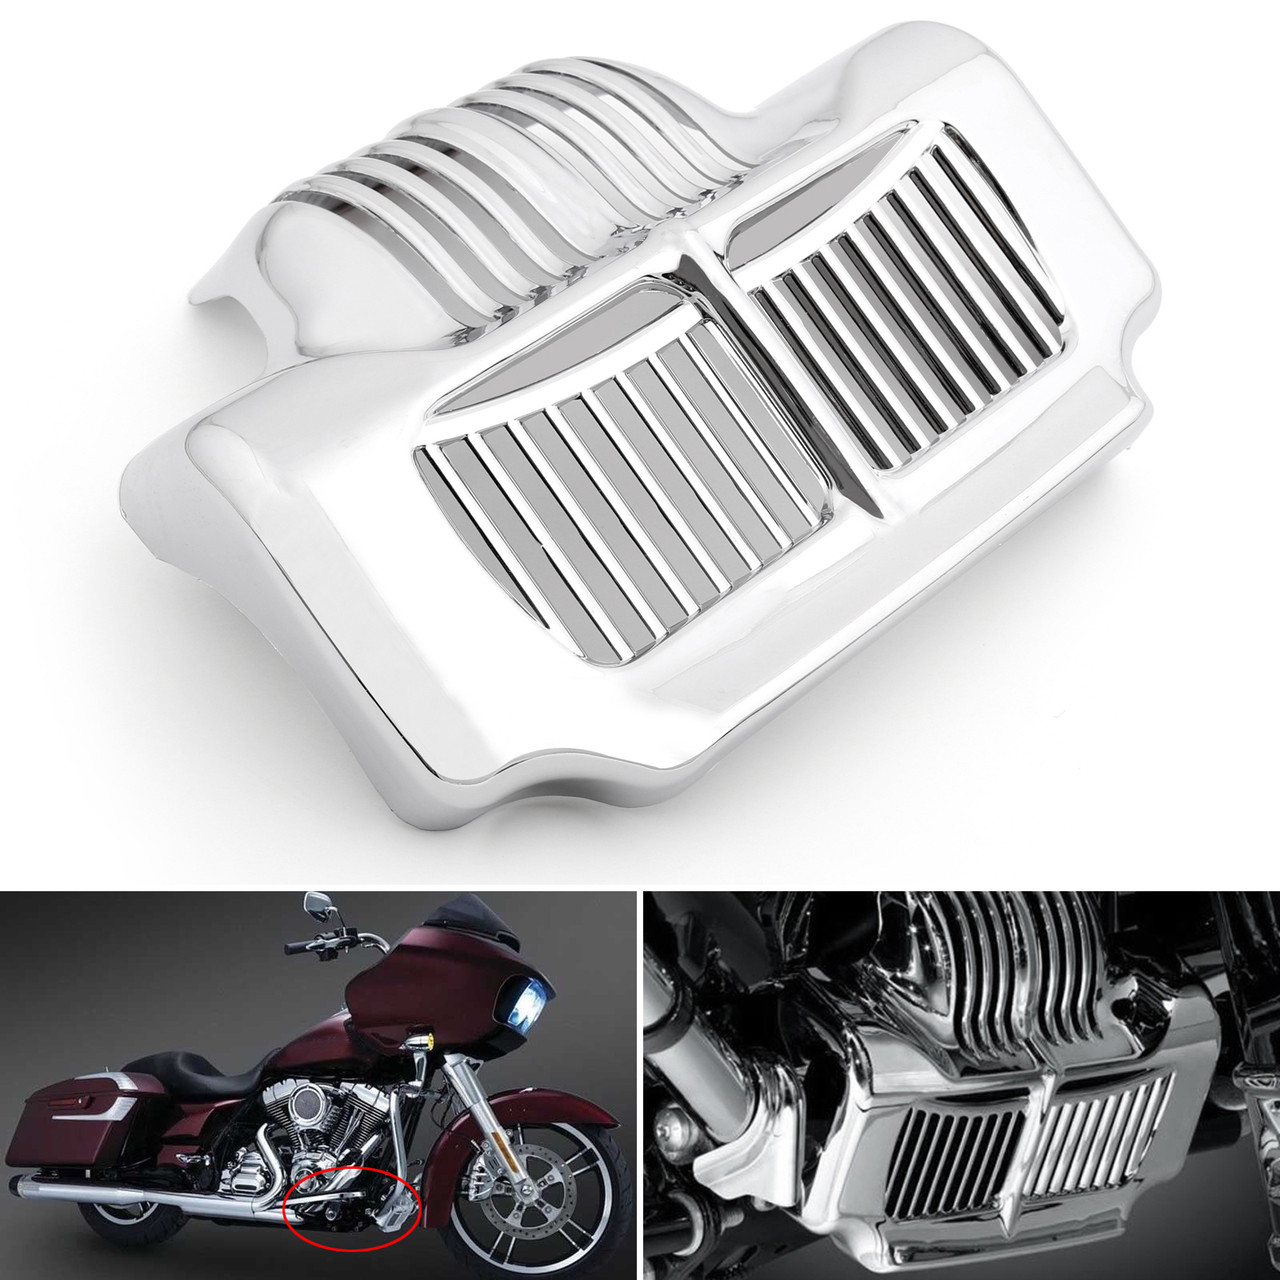 CNC Engine Cooler Radiator Frame Grill Cover For Harley Touring Electra Glide 